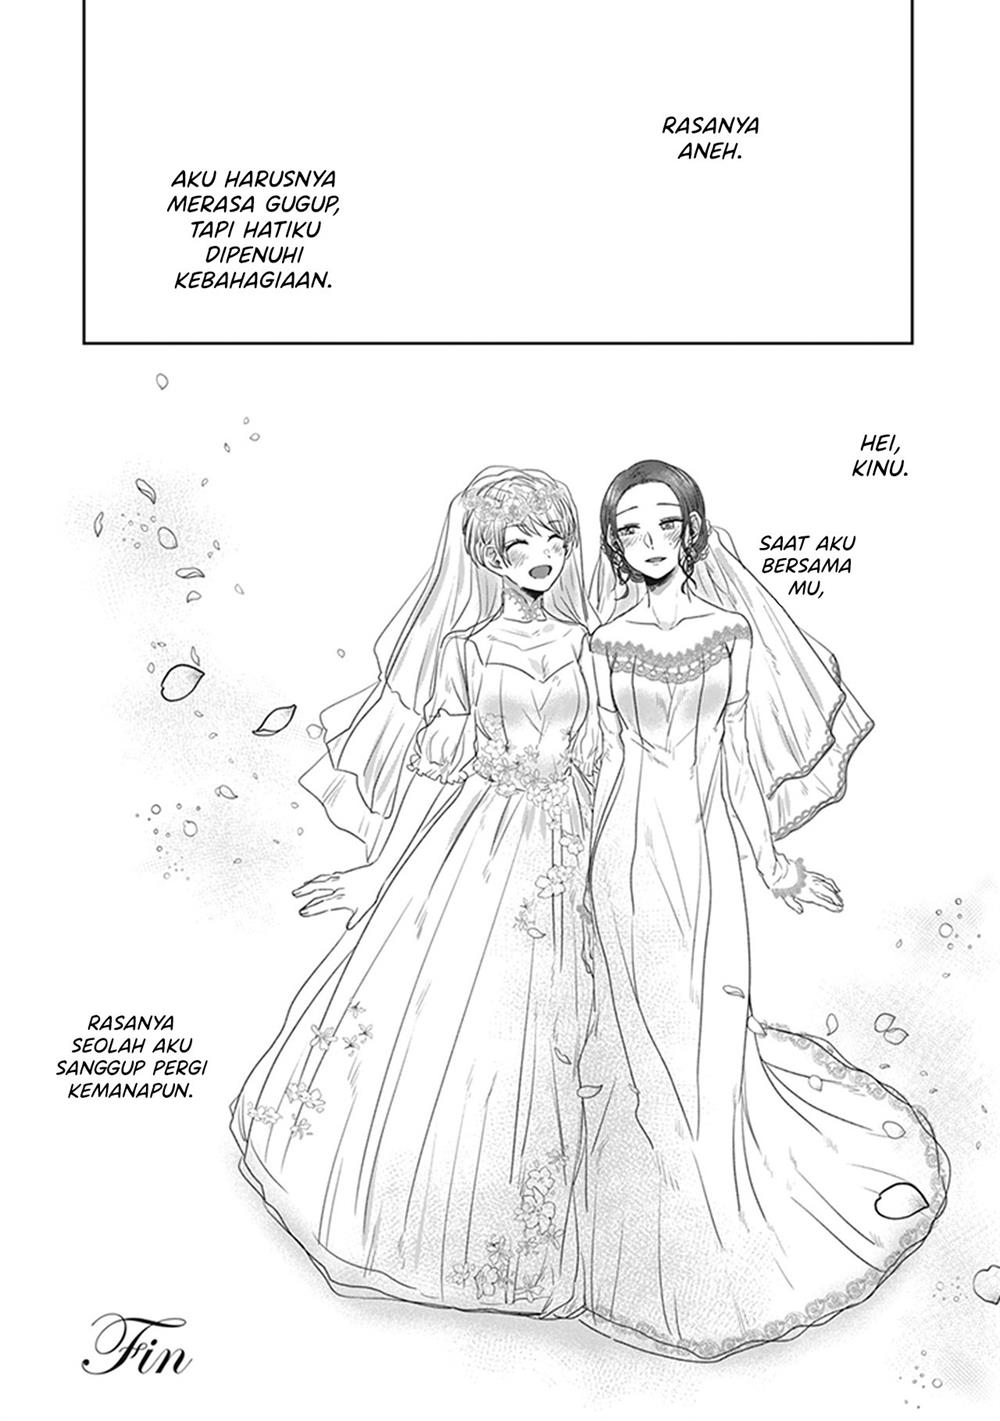 White Lilies in Love BRIDE’s Newlywed Yuri Anthology Chapter 3